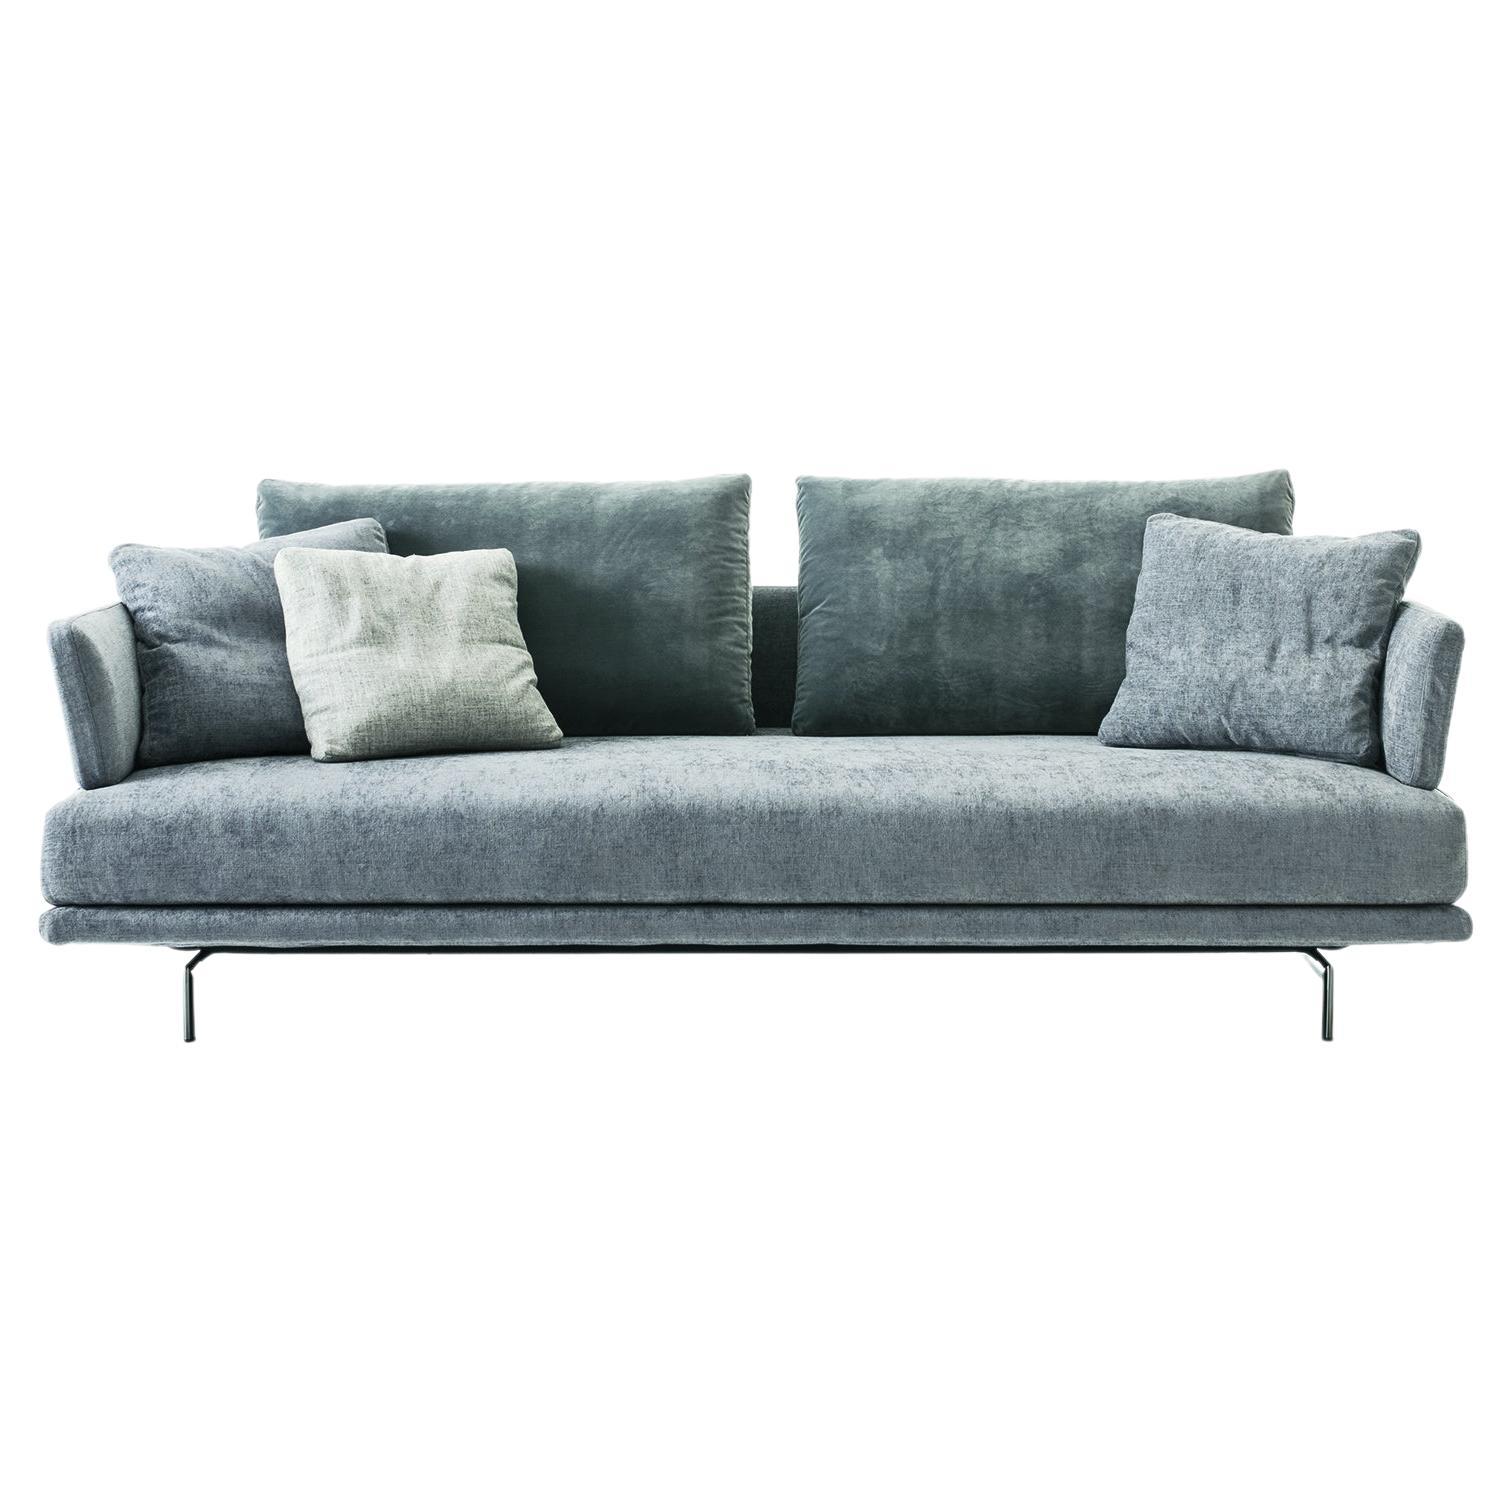 Quinta Strada 2-Seat Medium Sofa in Clean Grey Upholstery by Sergio Bicego For Sale